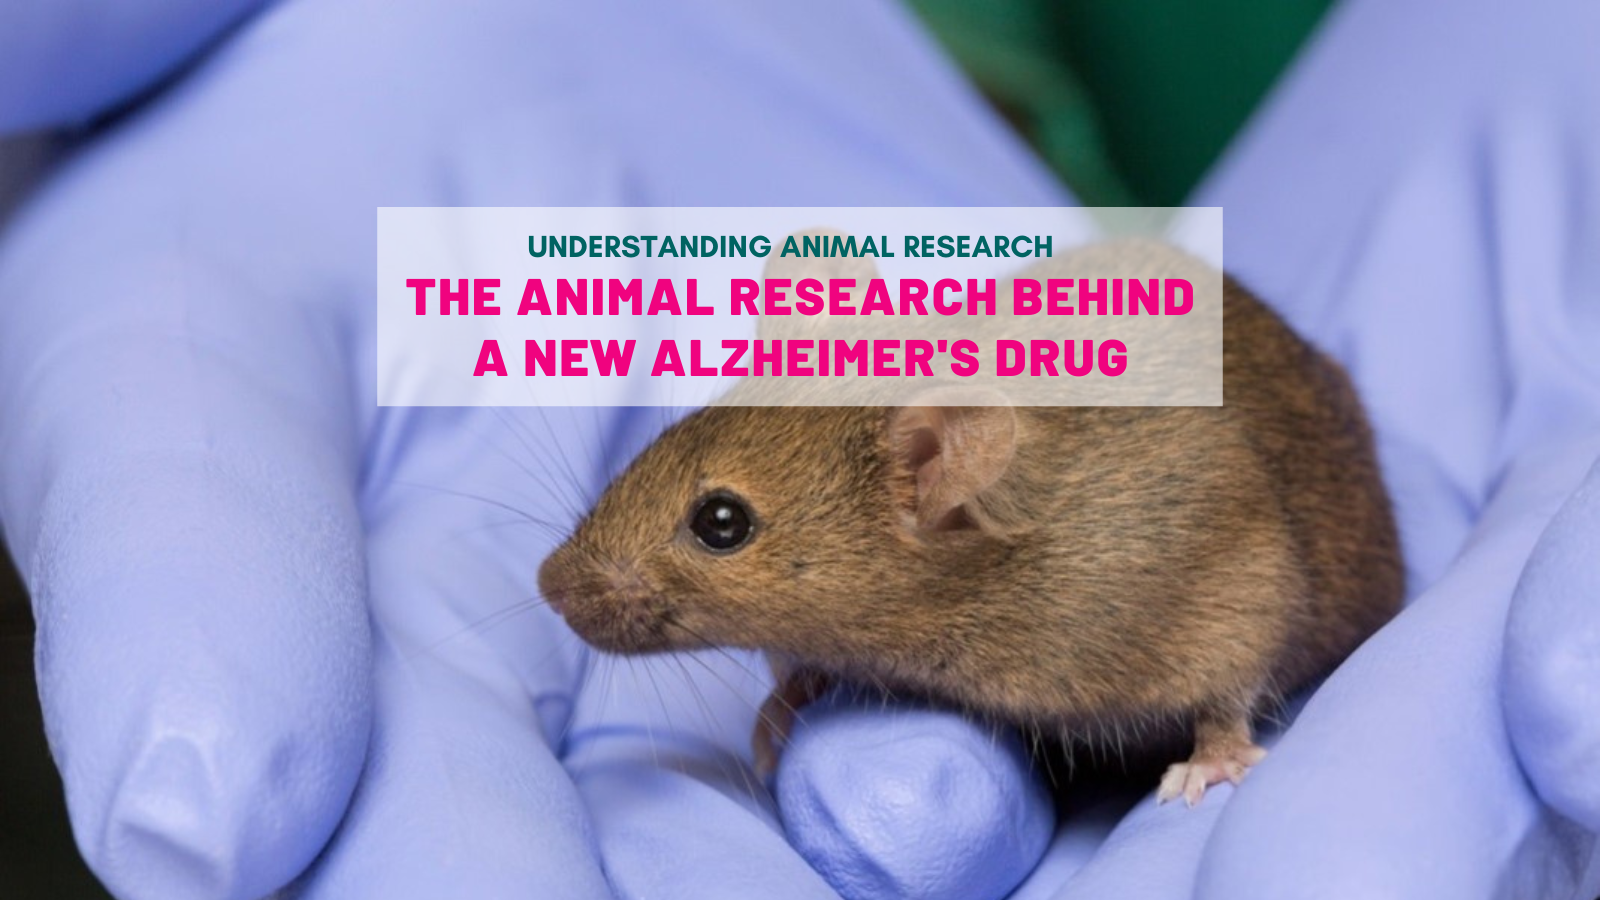 The animal research behind a new Alzheimer's drug